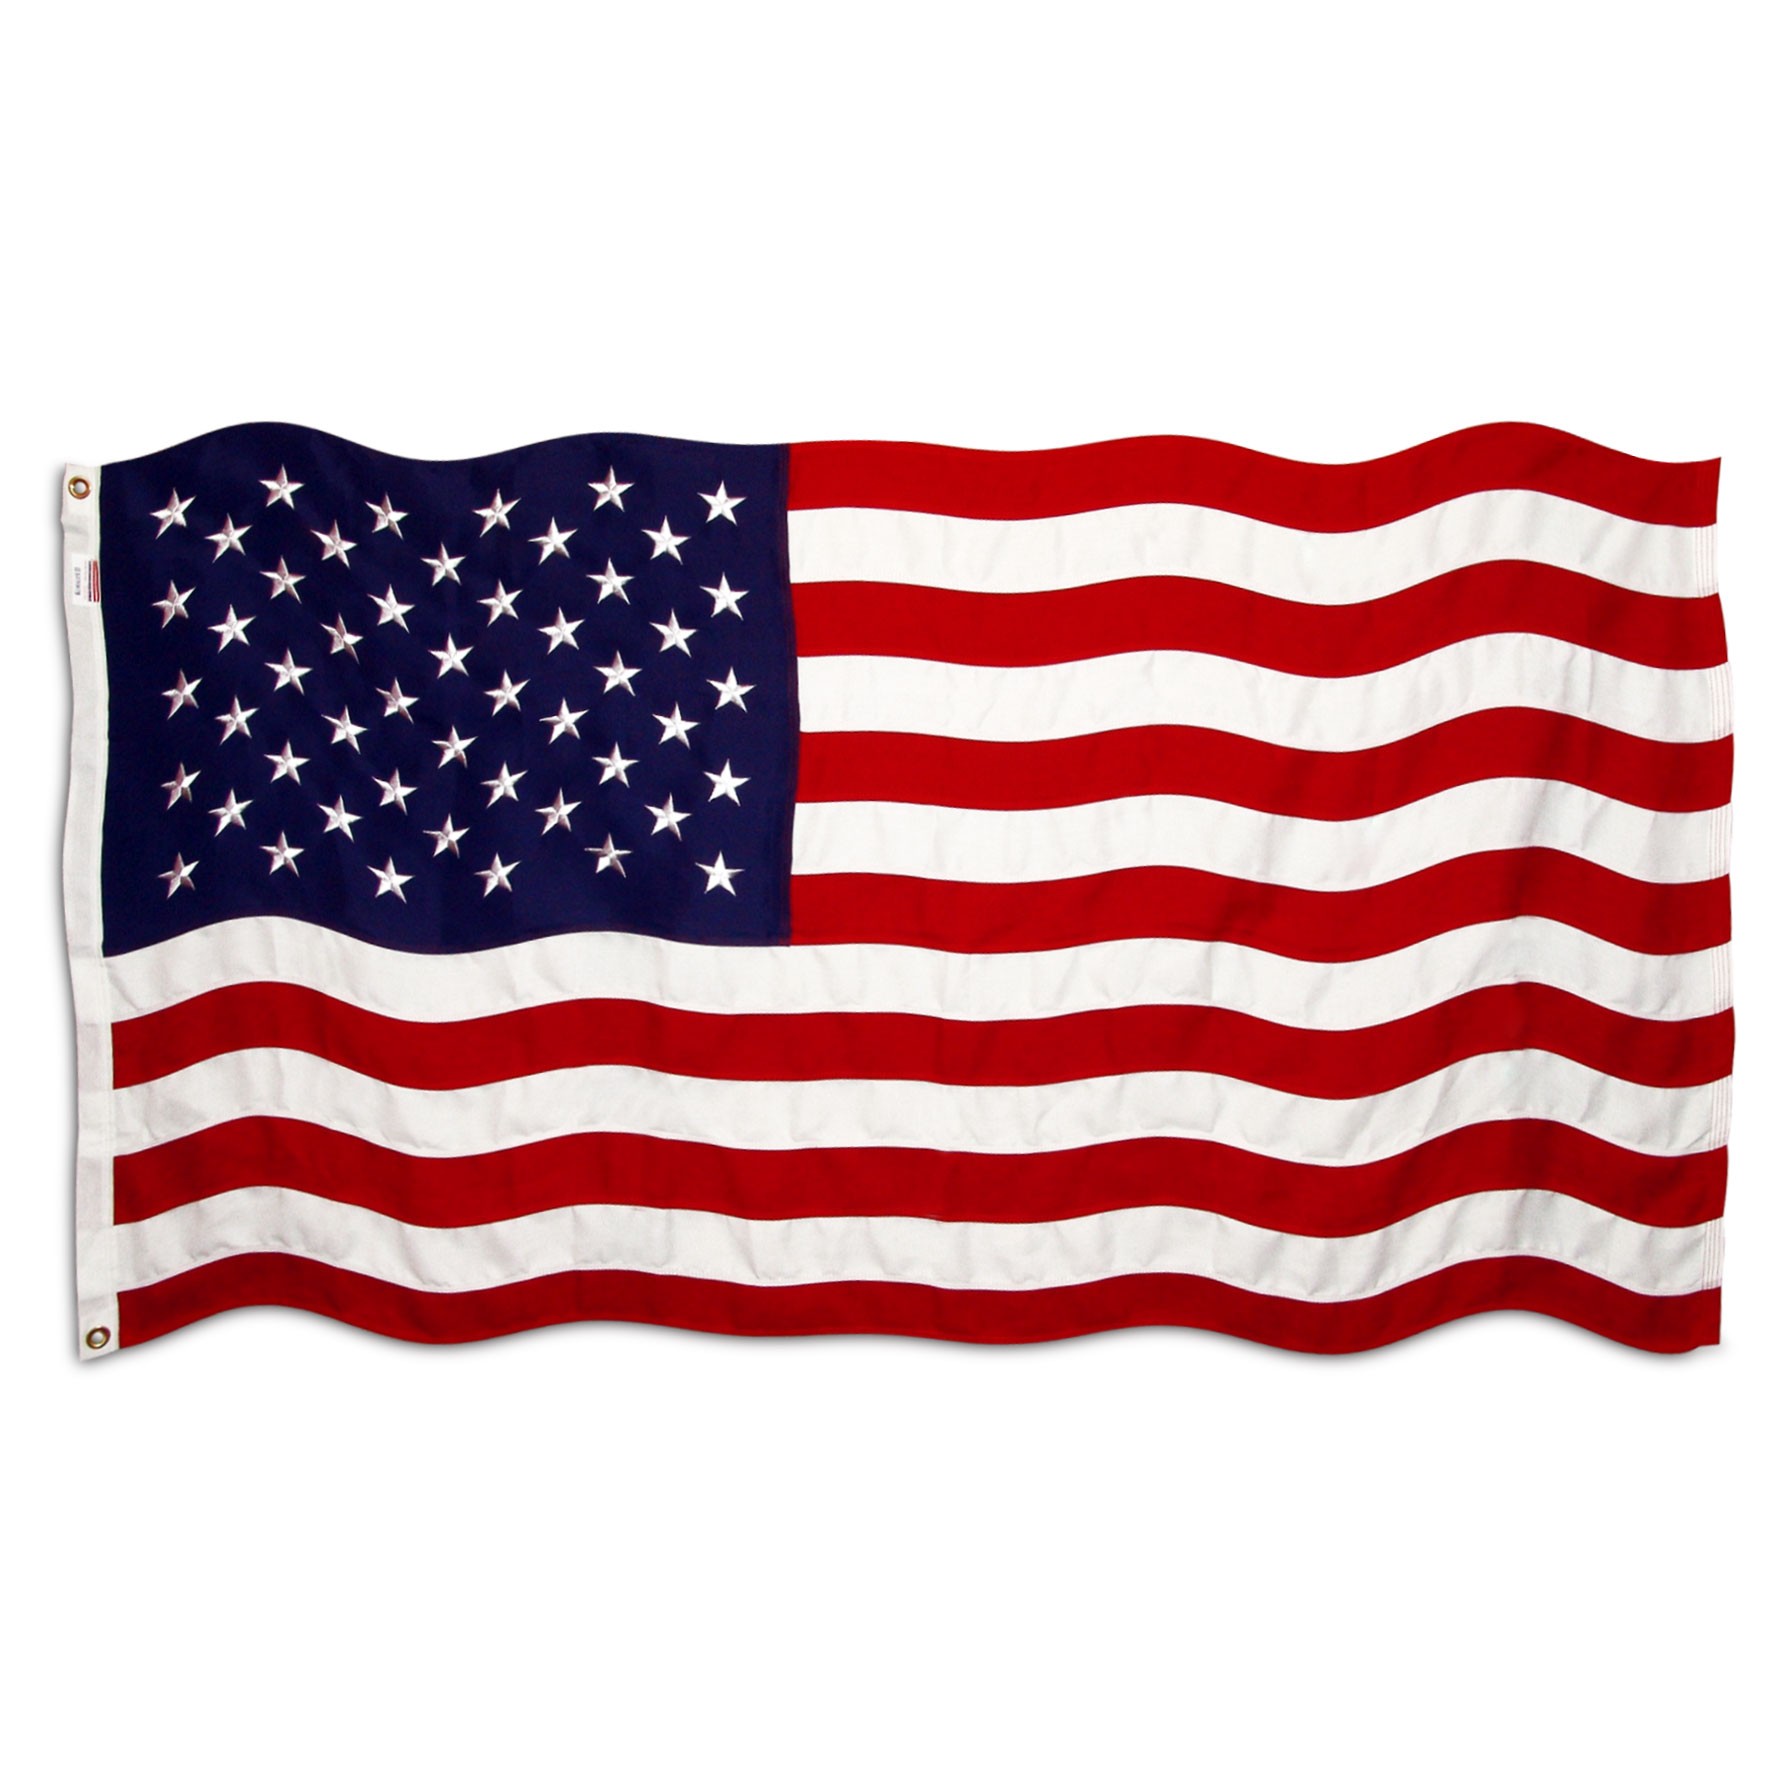 Bad clipart american flag png